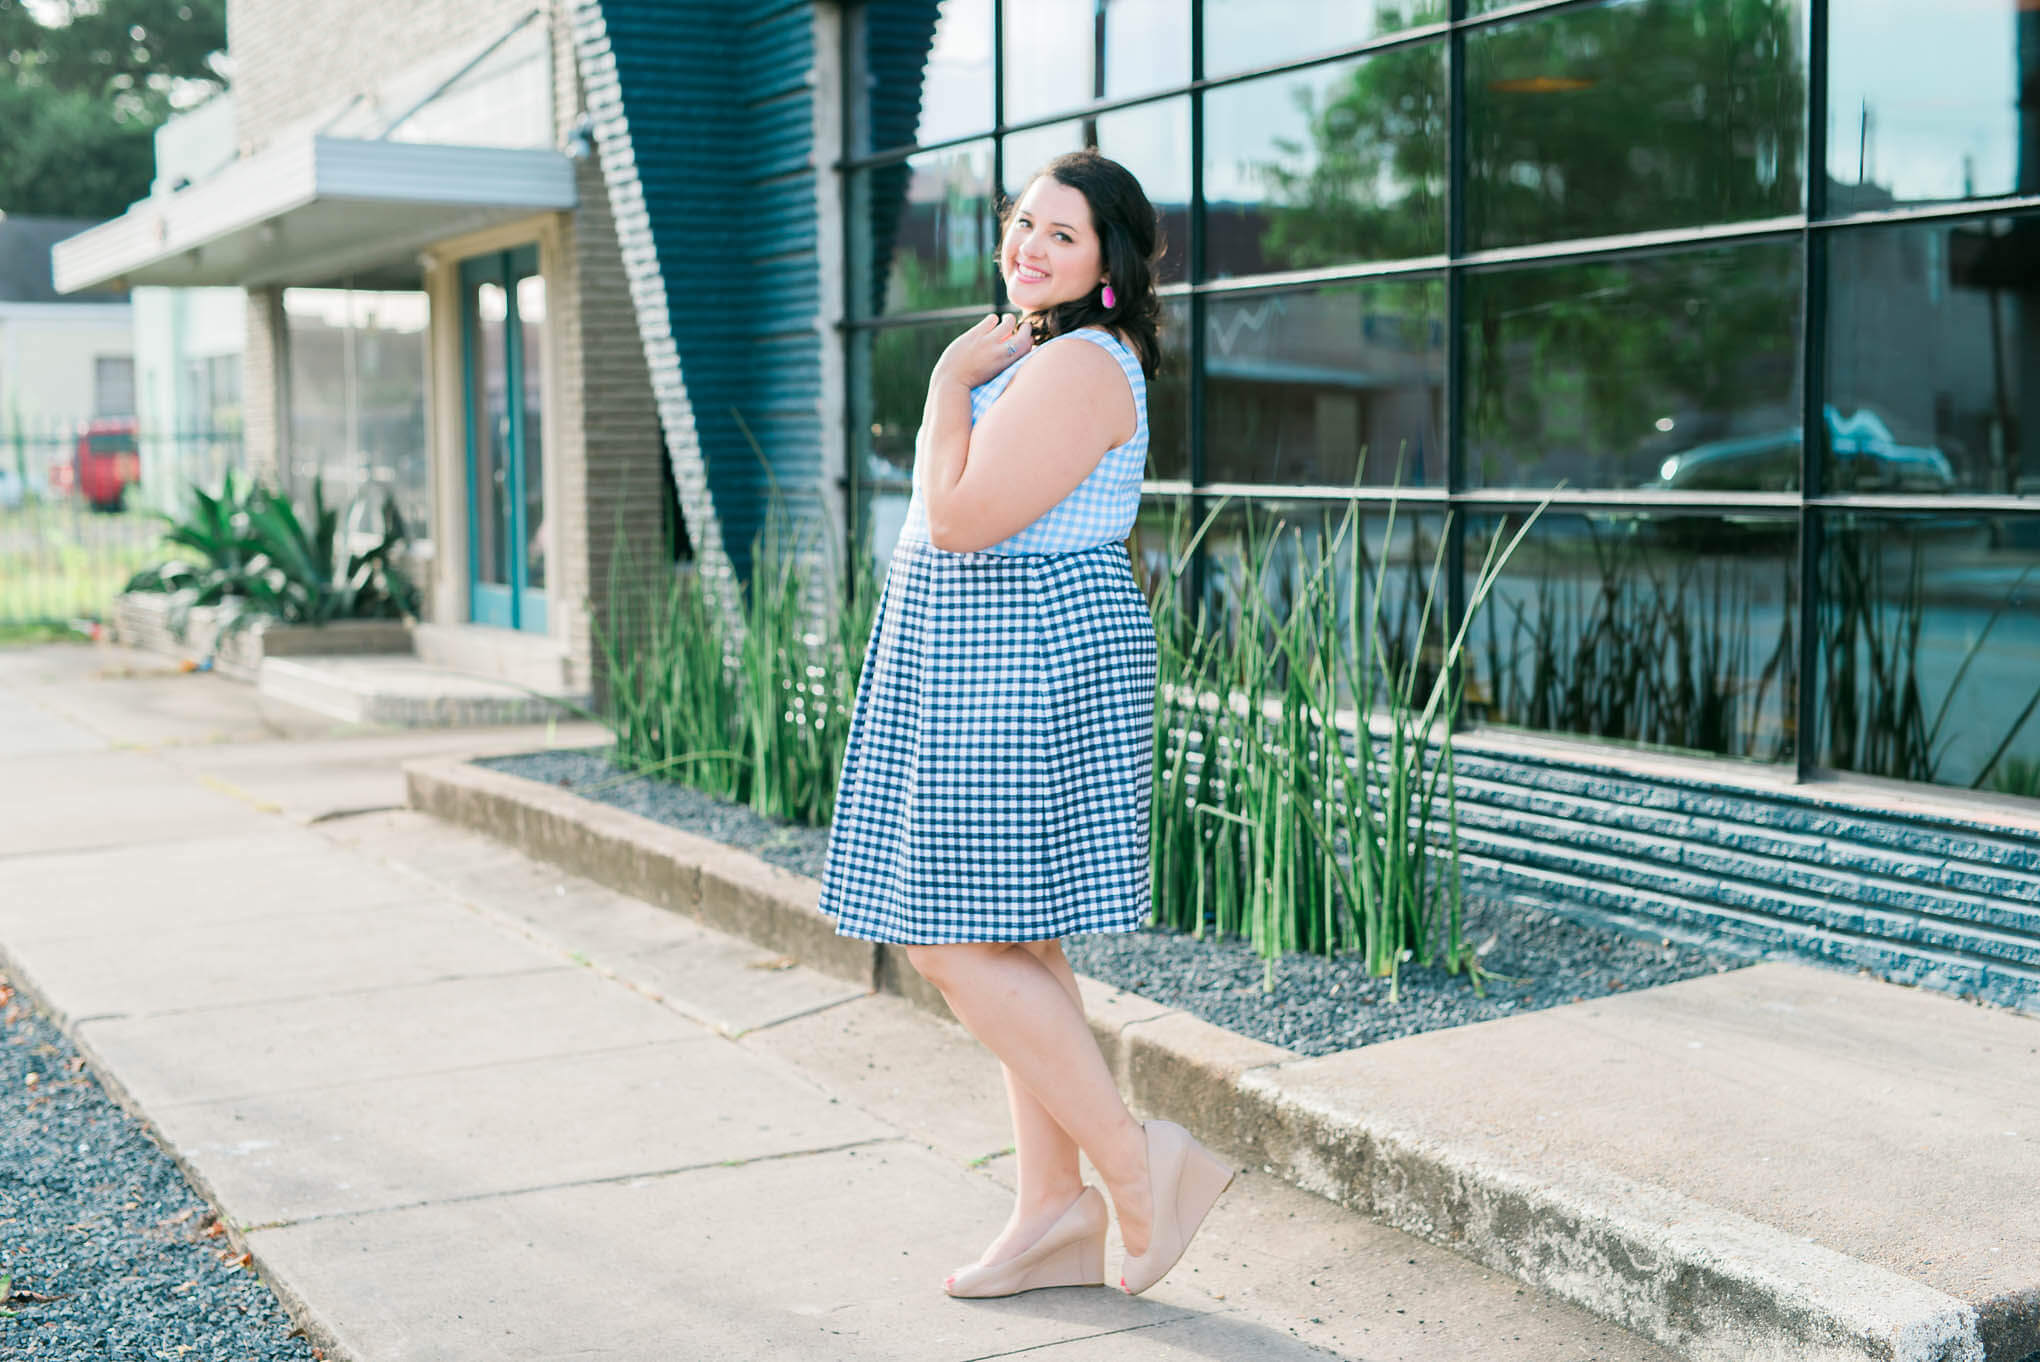 Eloquii Gingham Print Dress | What to wear to a wedding by Emily Bastedo from Something Gold, Something Blue featuring the Eloquii Blue and White Gingham Dress